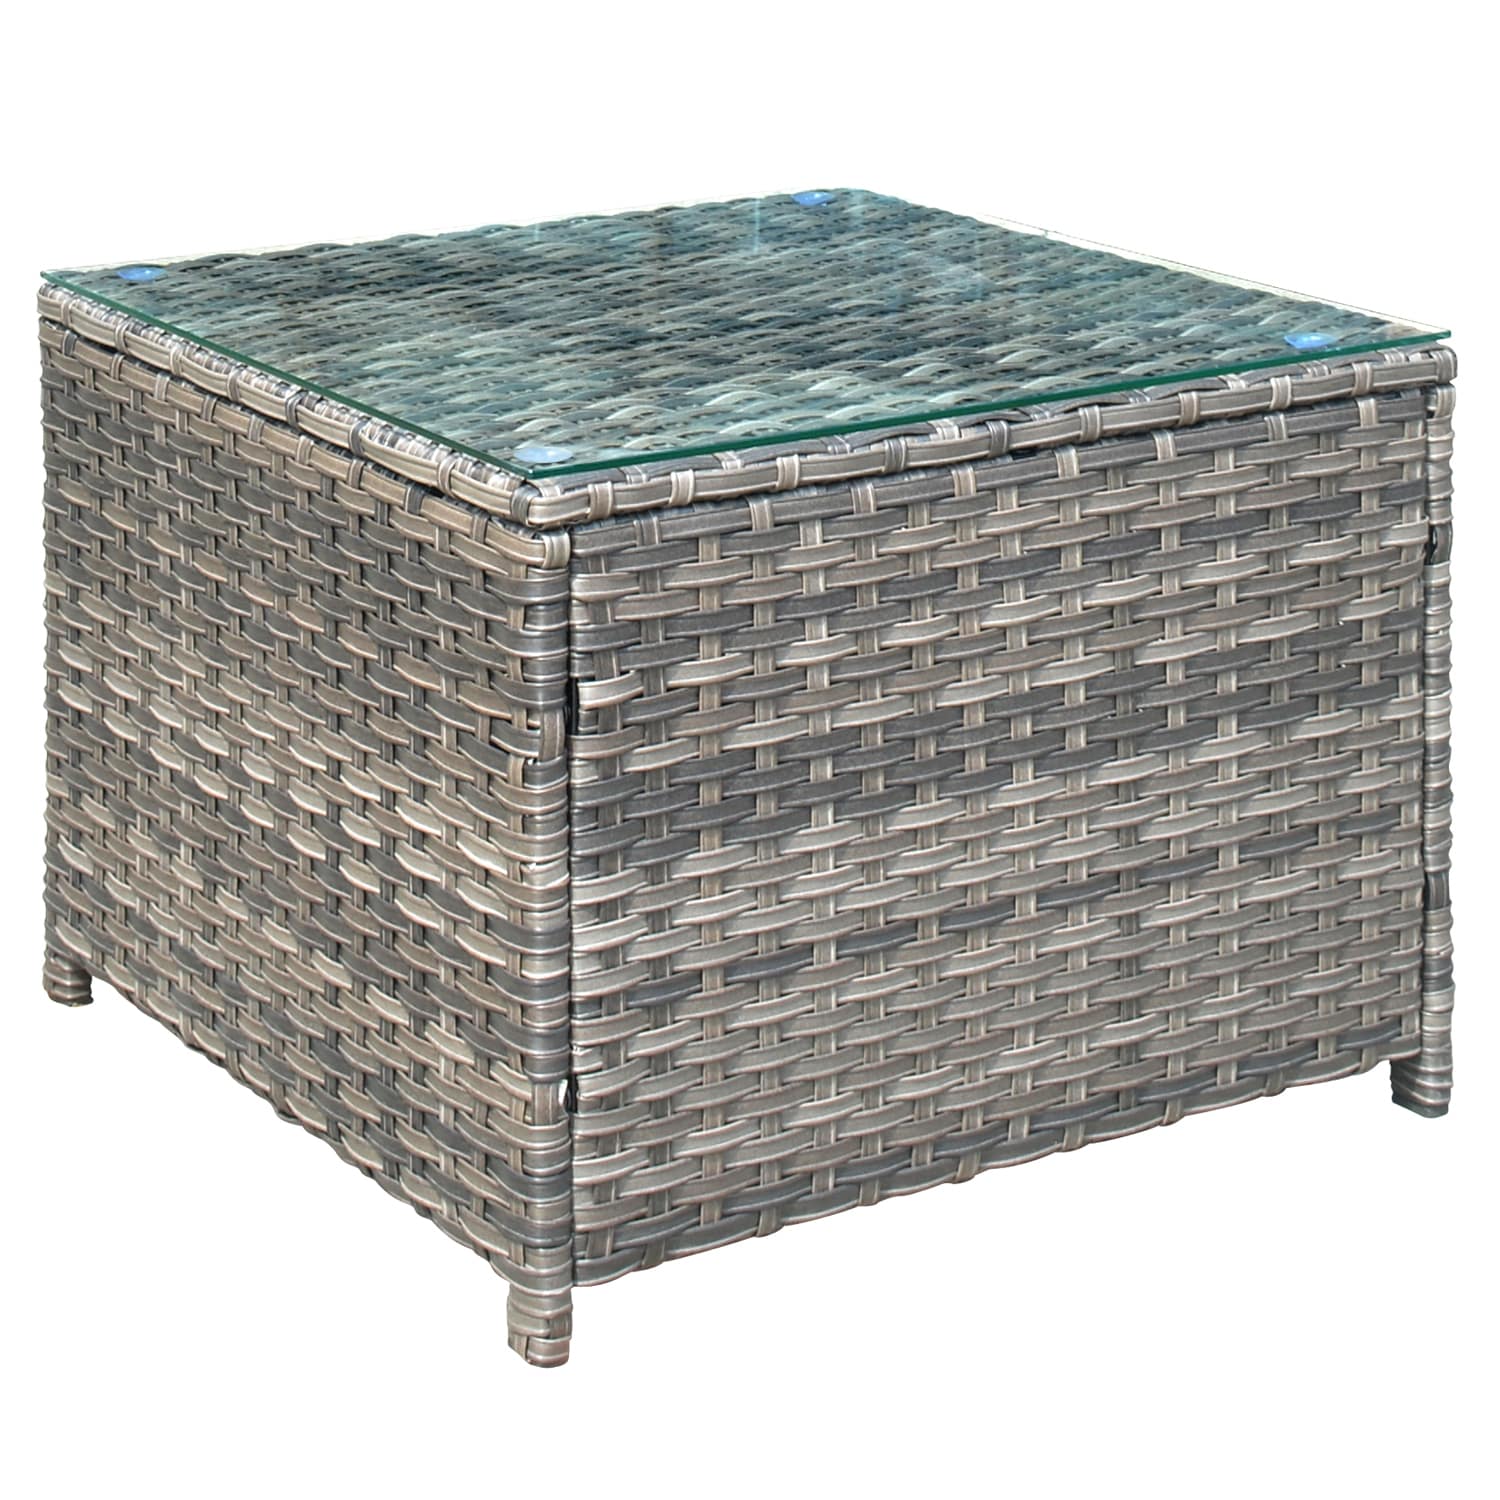 Beter Voeding Opsplitsen XIZZI Gaea Square Wicker Outdoor Coffee Table 23.89-in W x 23.89-in L in  the Patio Tables department at Lowes.com